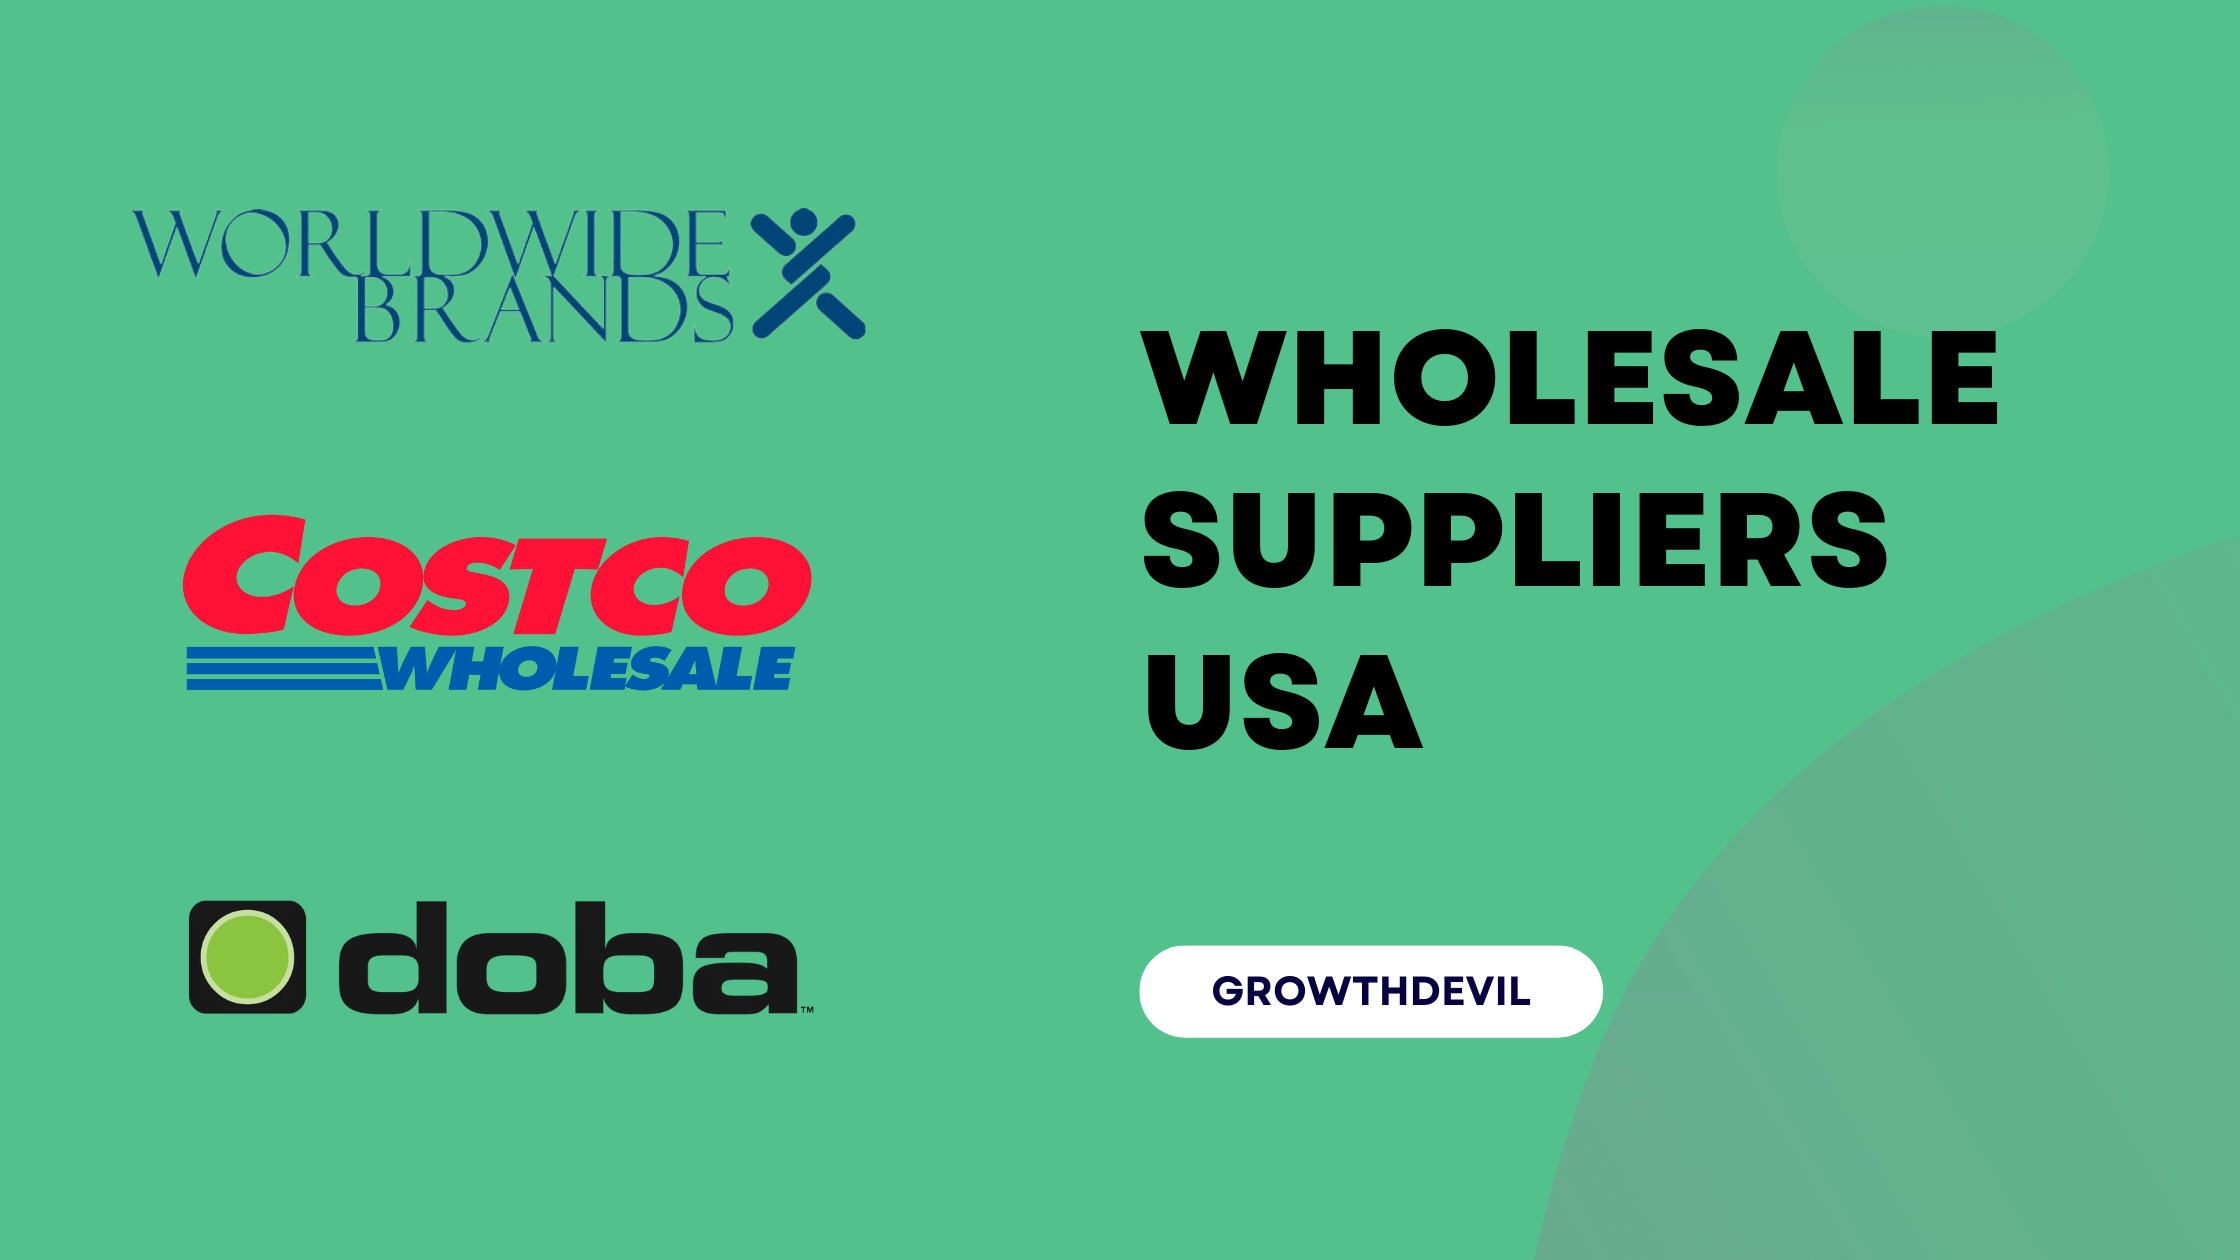 Wholesale Suppliers USA - GrowthDevil